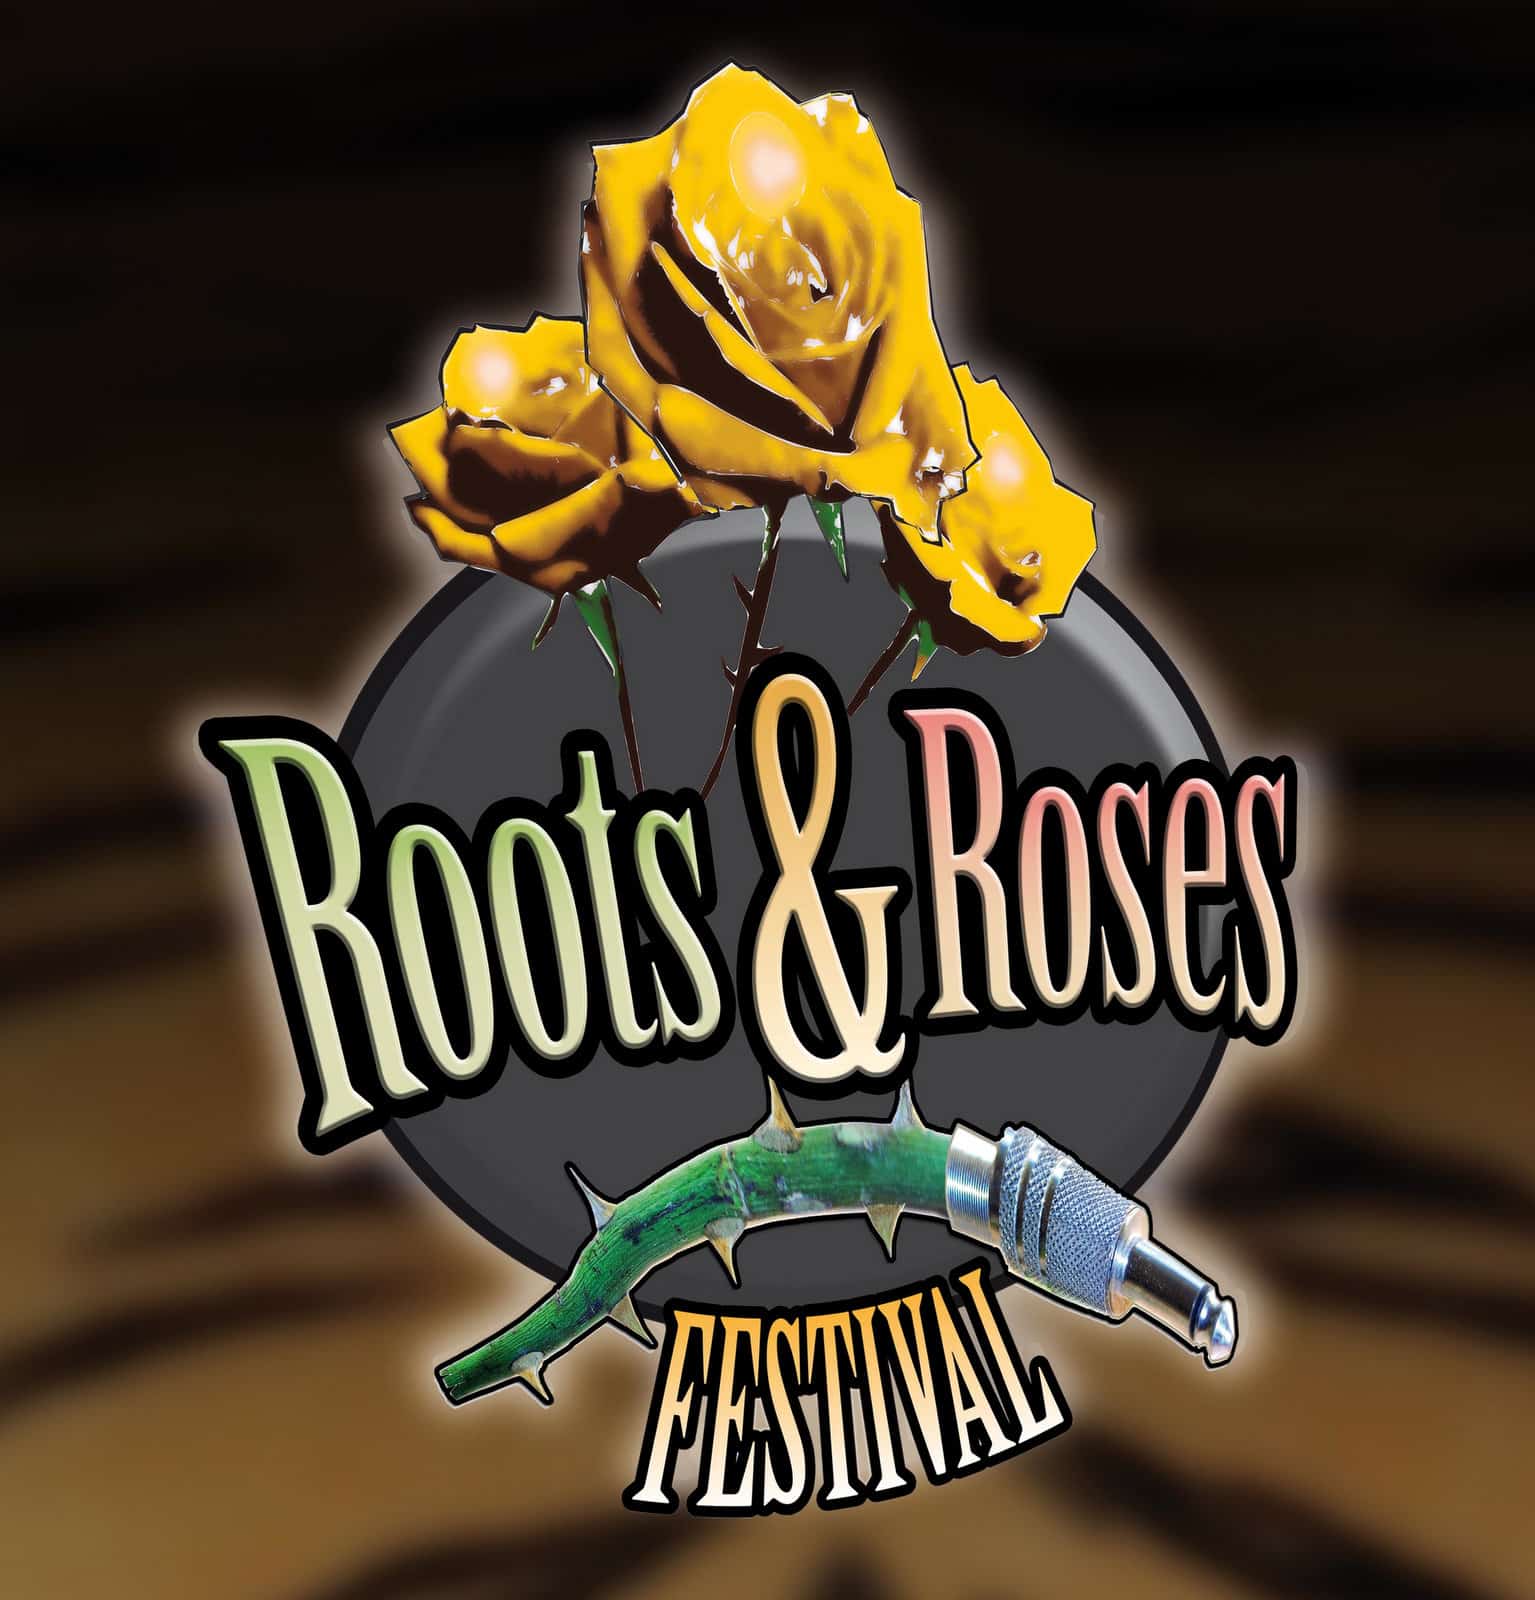 ROOTS & ROSES FESTIVAL